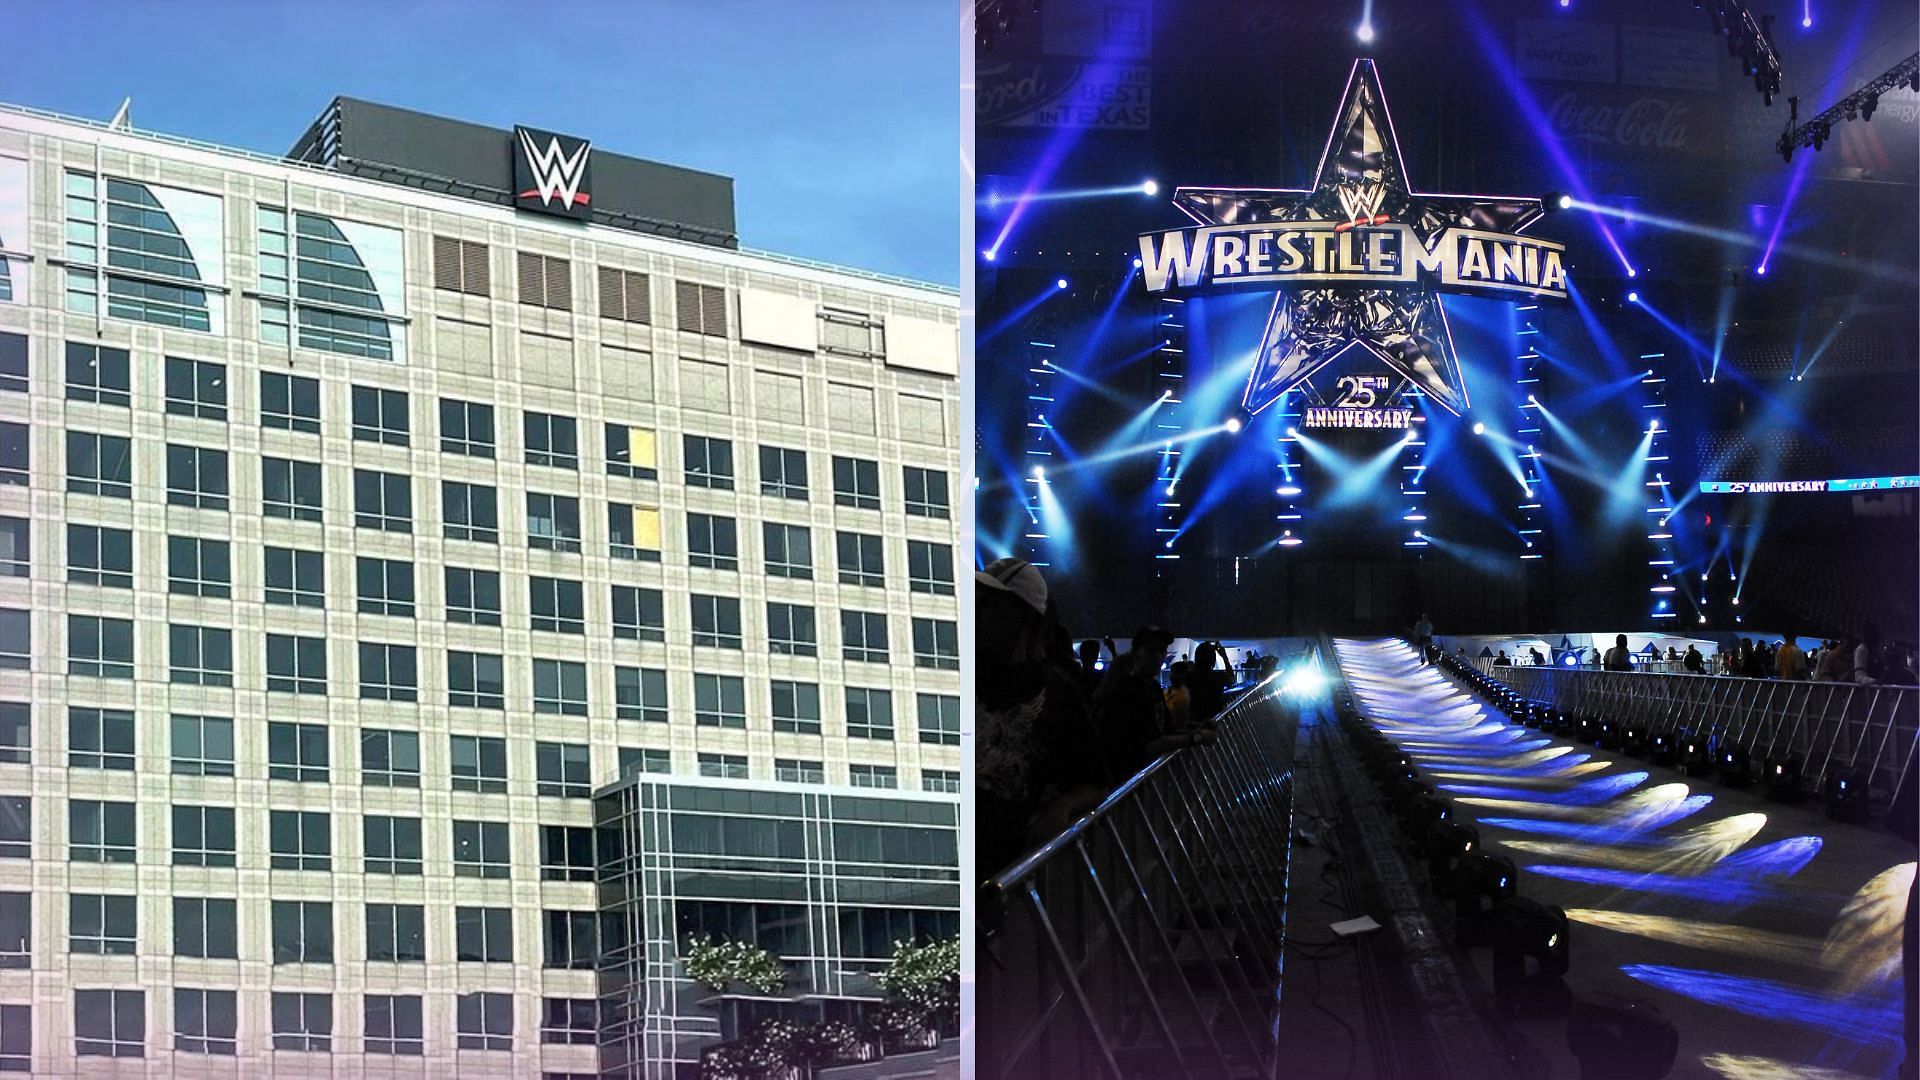 If an enclosed stadium is built, WrestleMania will come to